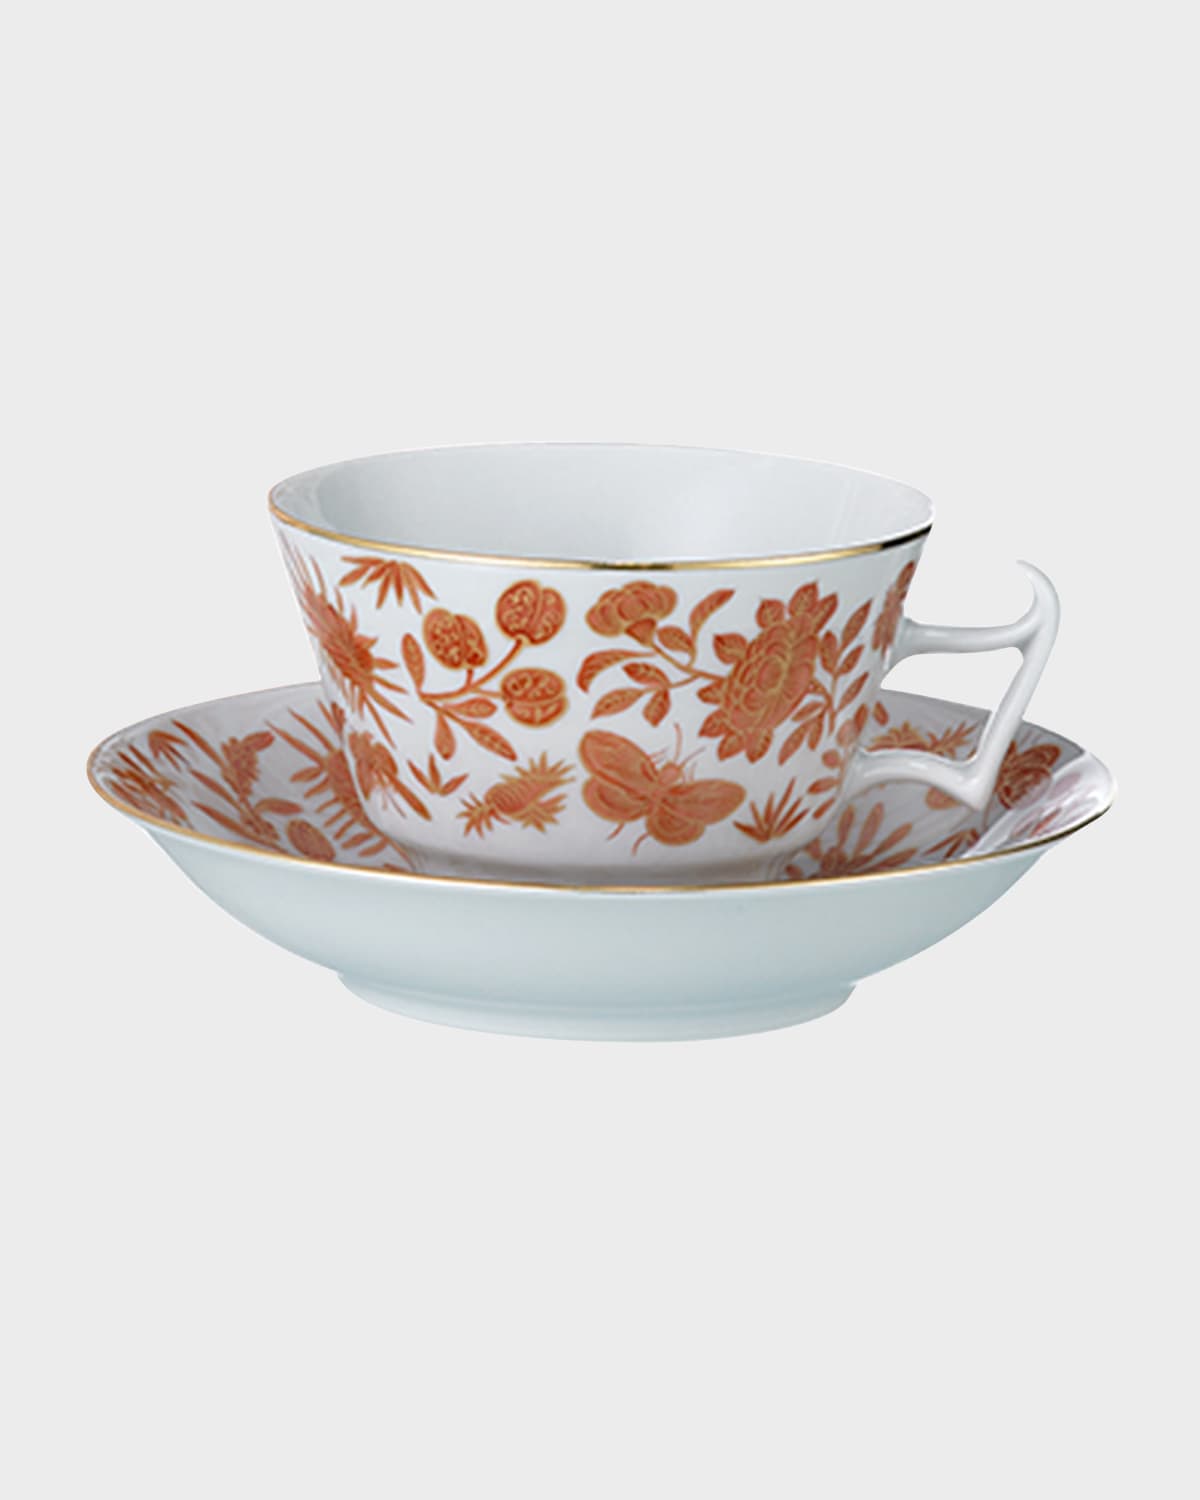 MOTTAHEDEH SACRED BIRD & BUTTERFLY TEACUP & SAUCER PLATE